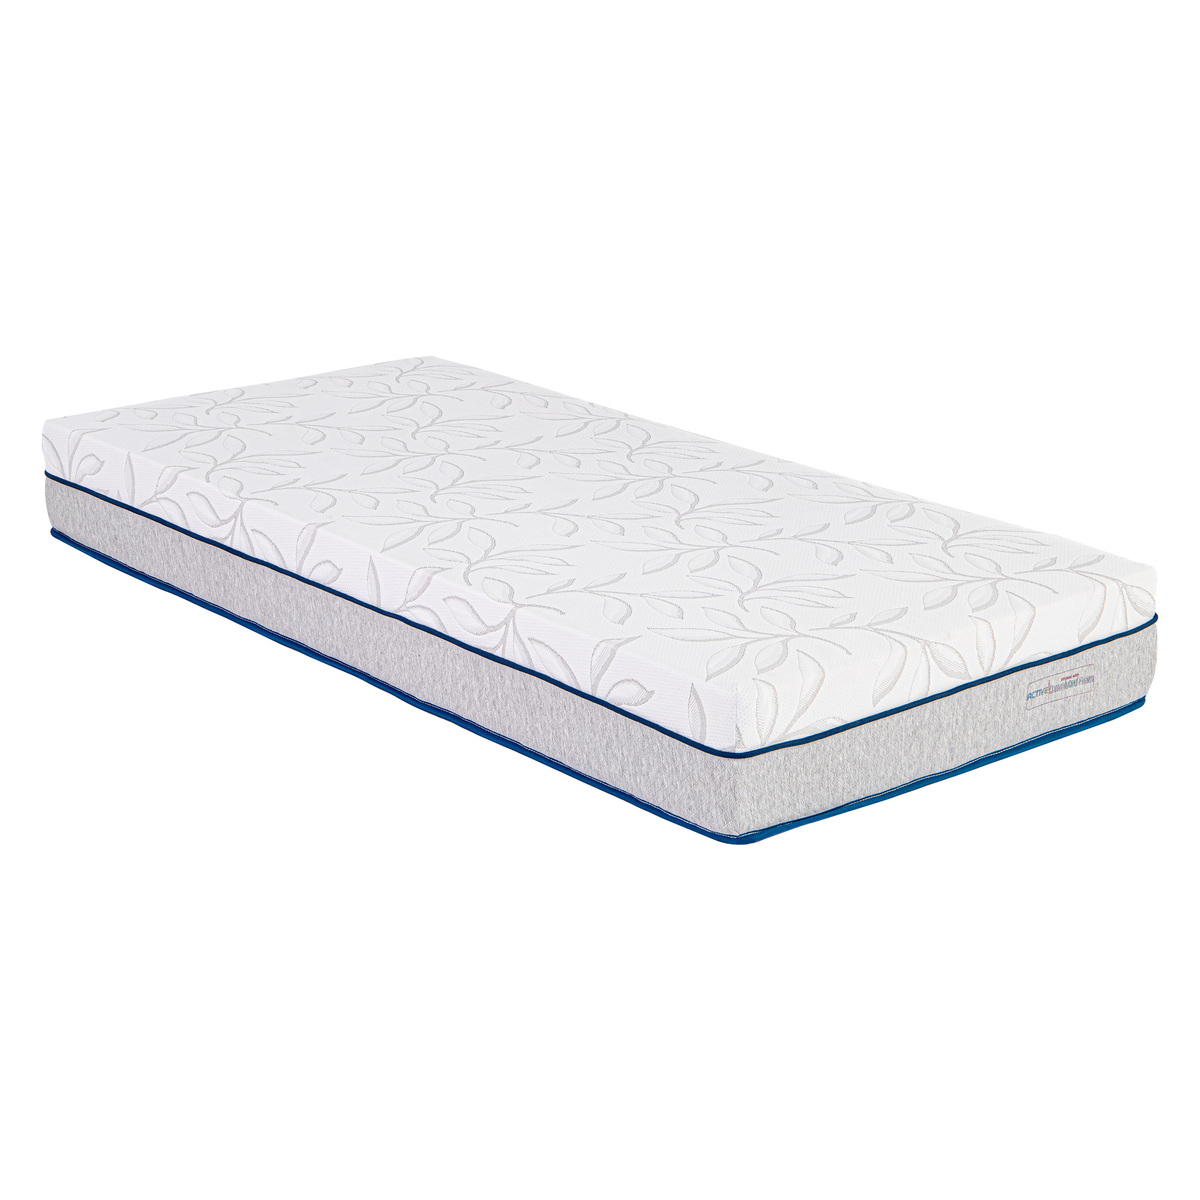 Royal Cozee Medical Gel Infused Mattress 190x150+20cm